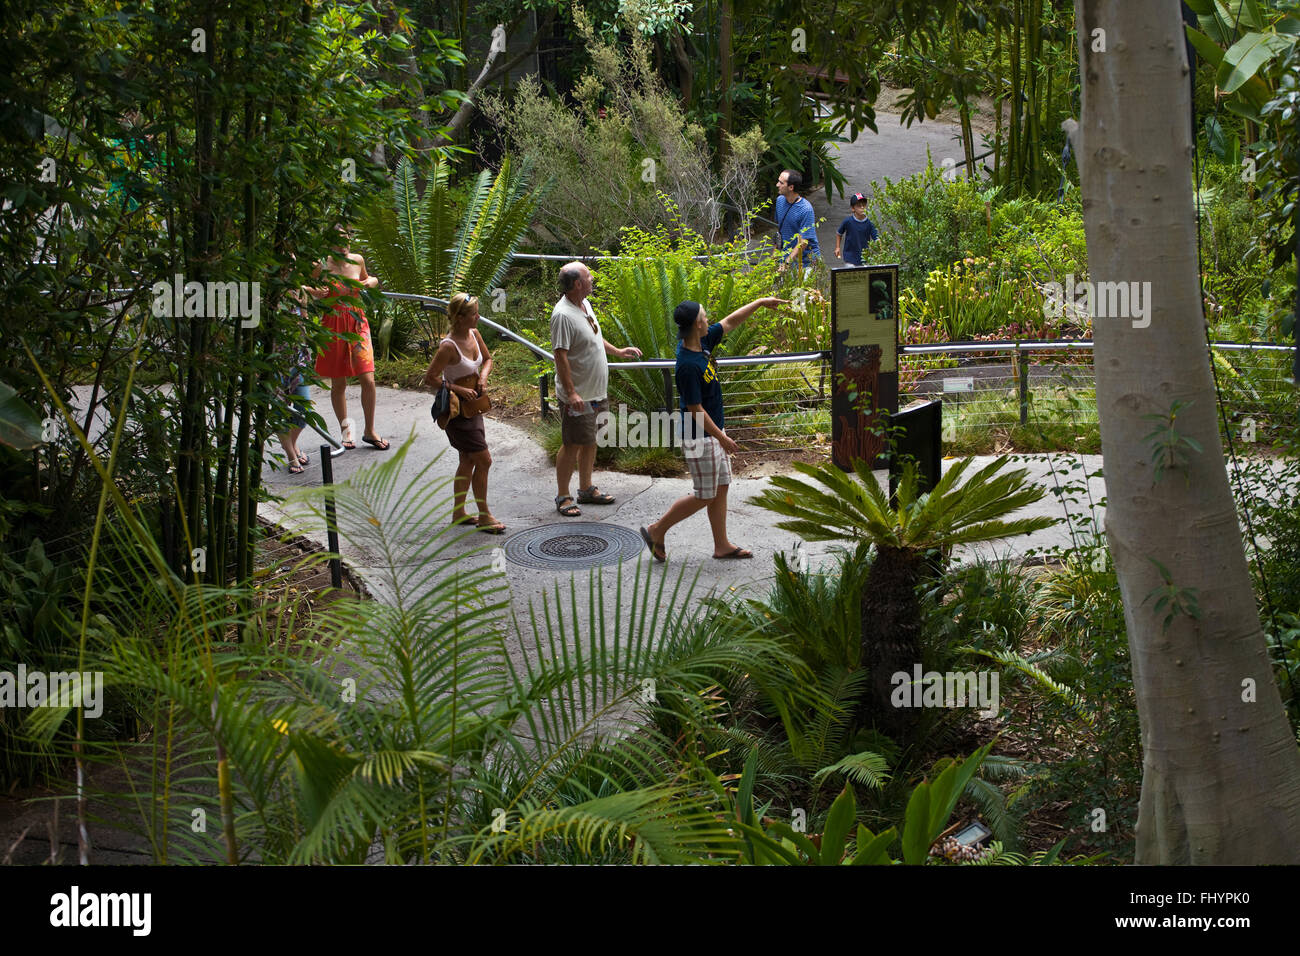 TOURISTS are walking along a pathway at the SAN DIEGO ZOO - CALIFORNIA Stock Photo